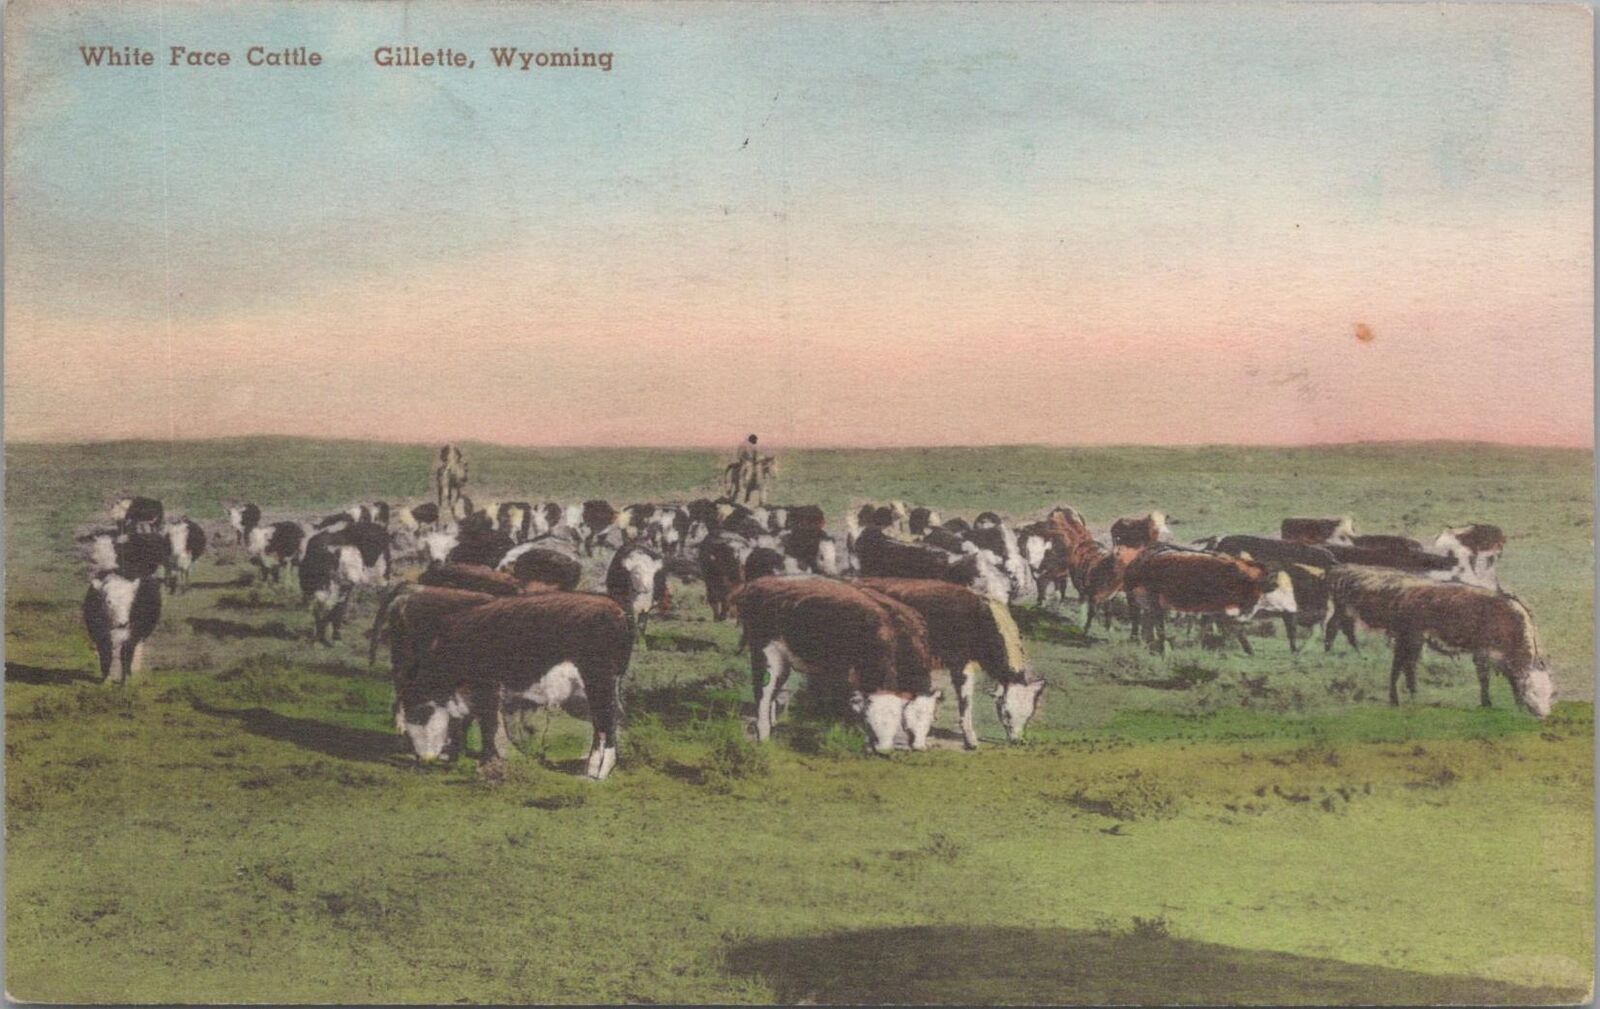 Postcard White Face Cattle Gillette Wyoming WY 